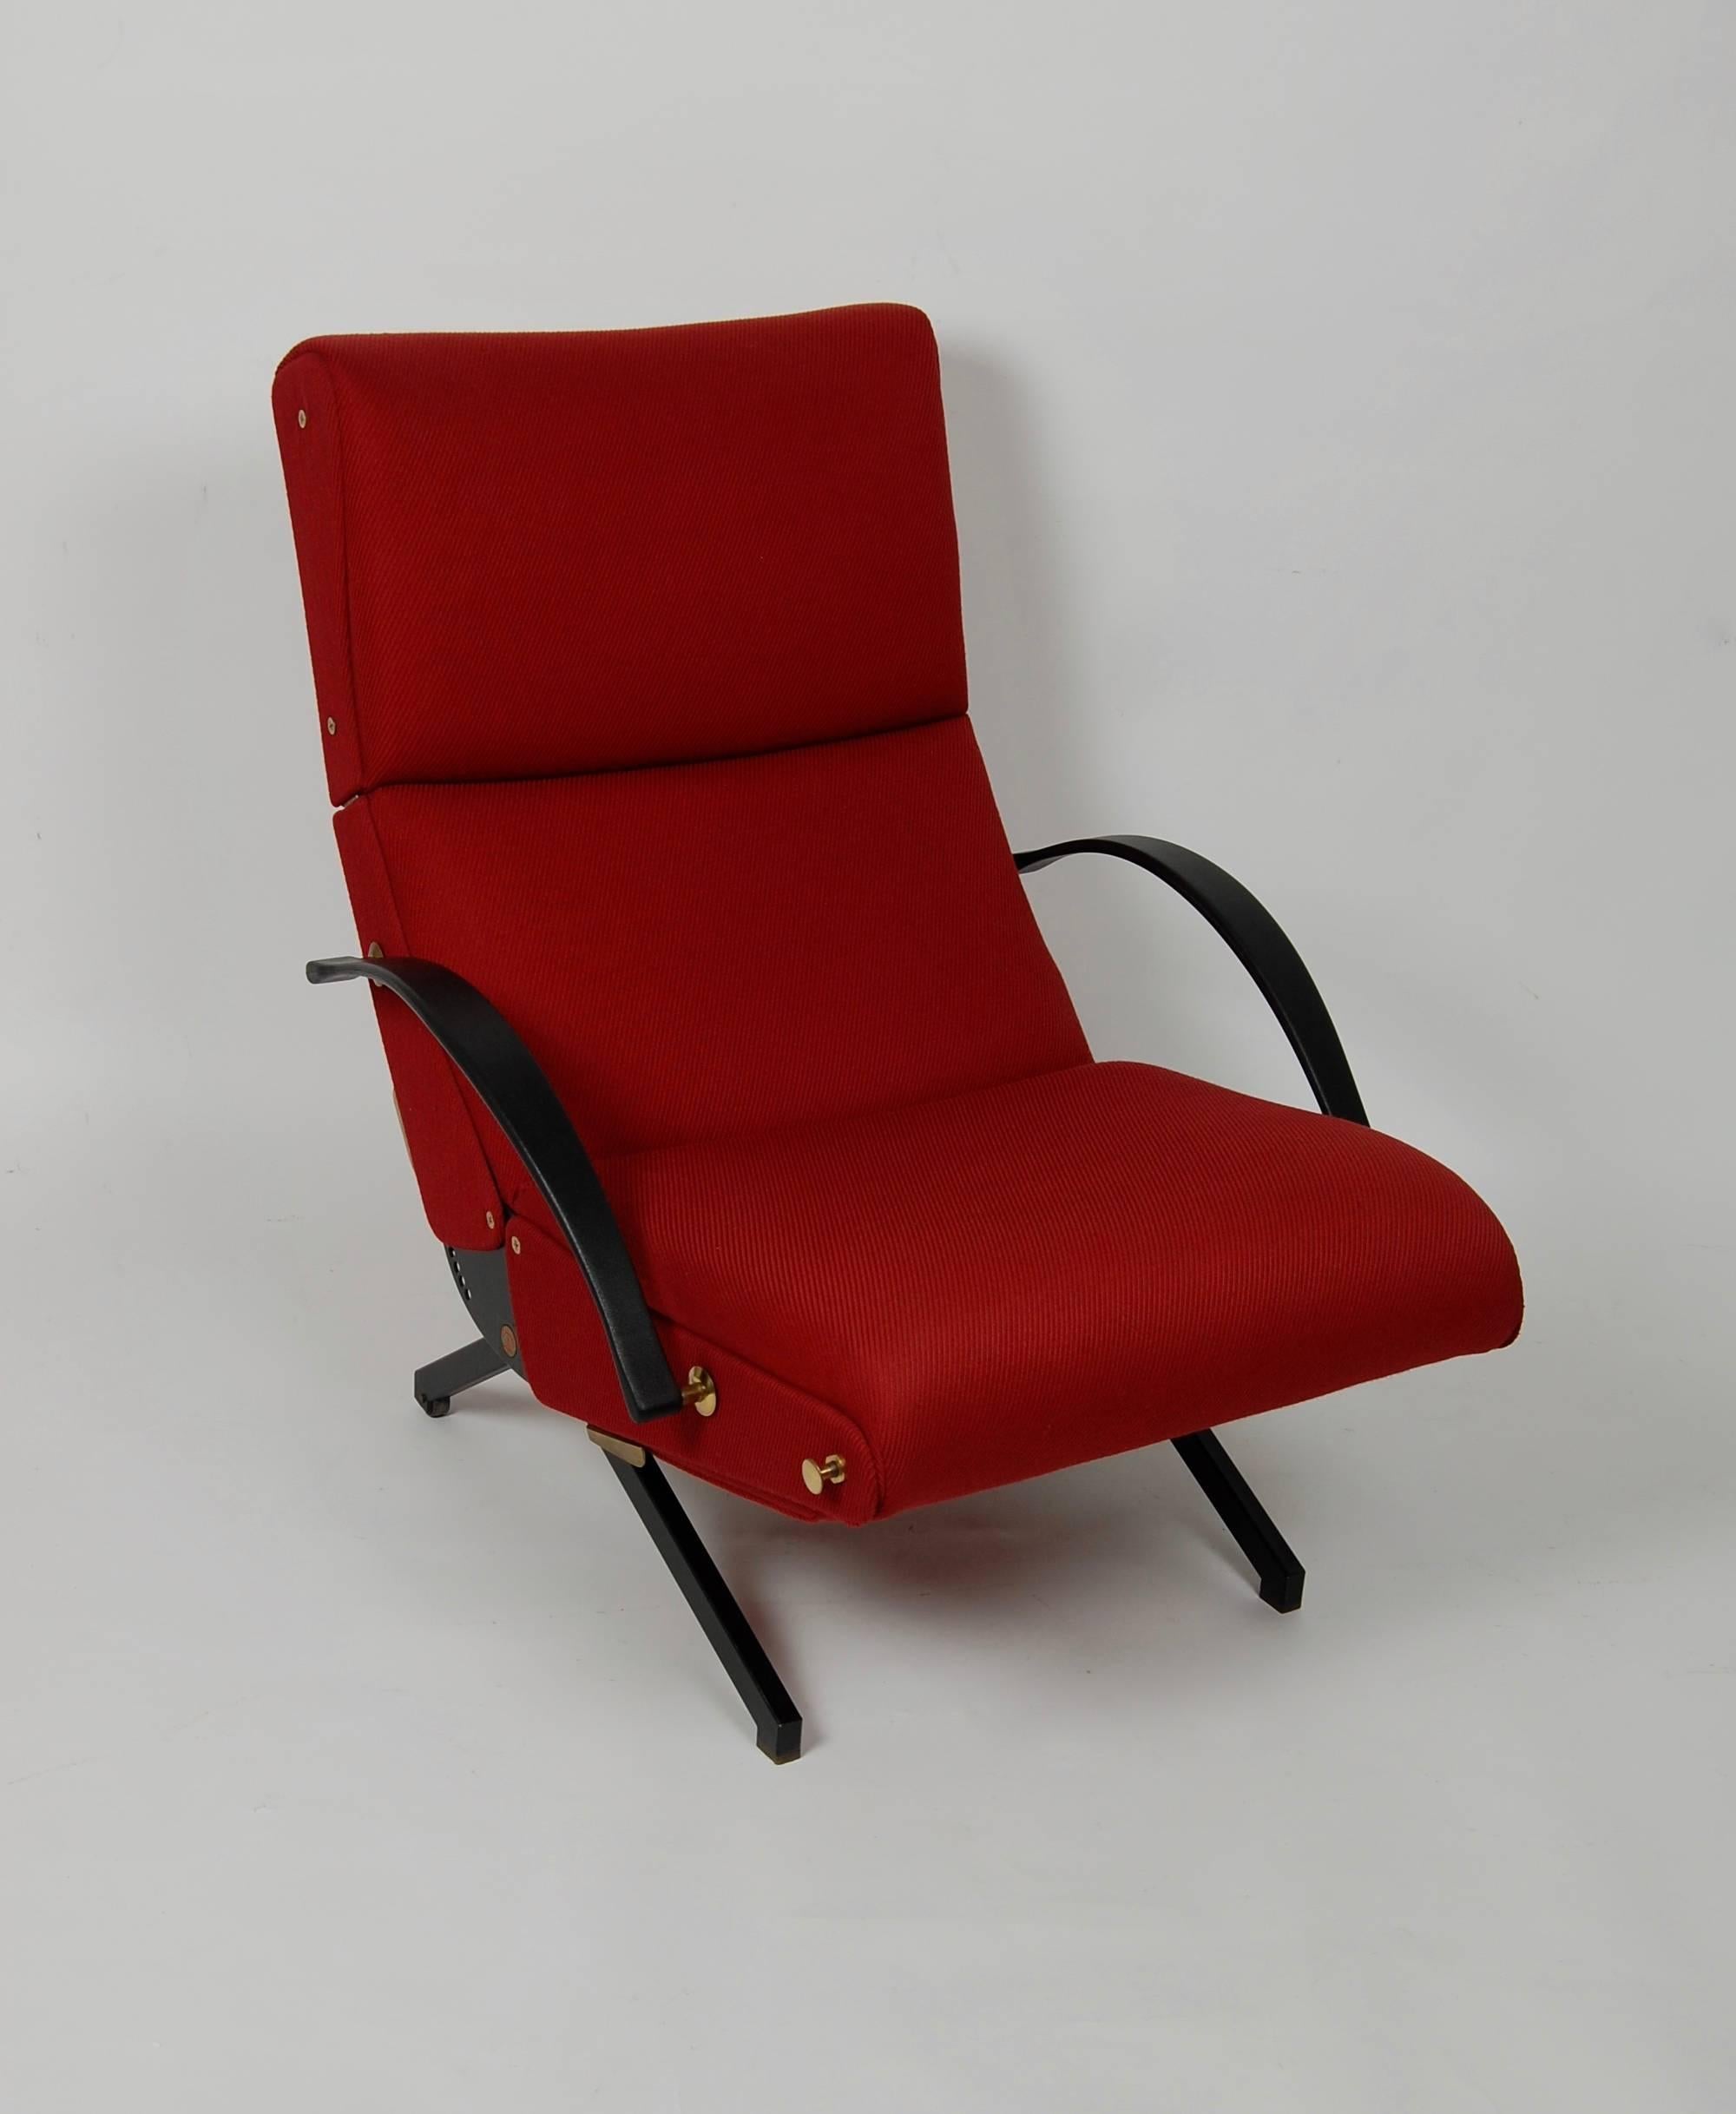 1960s production P40 Tecno lounge chair by Architect Osvaldo Borsani. A chair designed to be compact yet have many adjustments for lounging. The previous owner had it reupholstered in original Tecno fabric a number of years ago and has a light